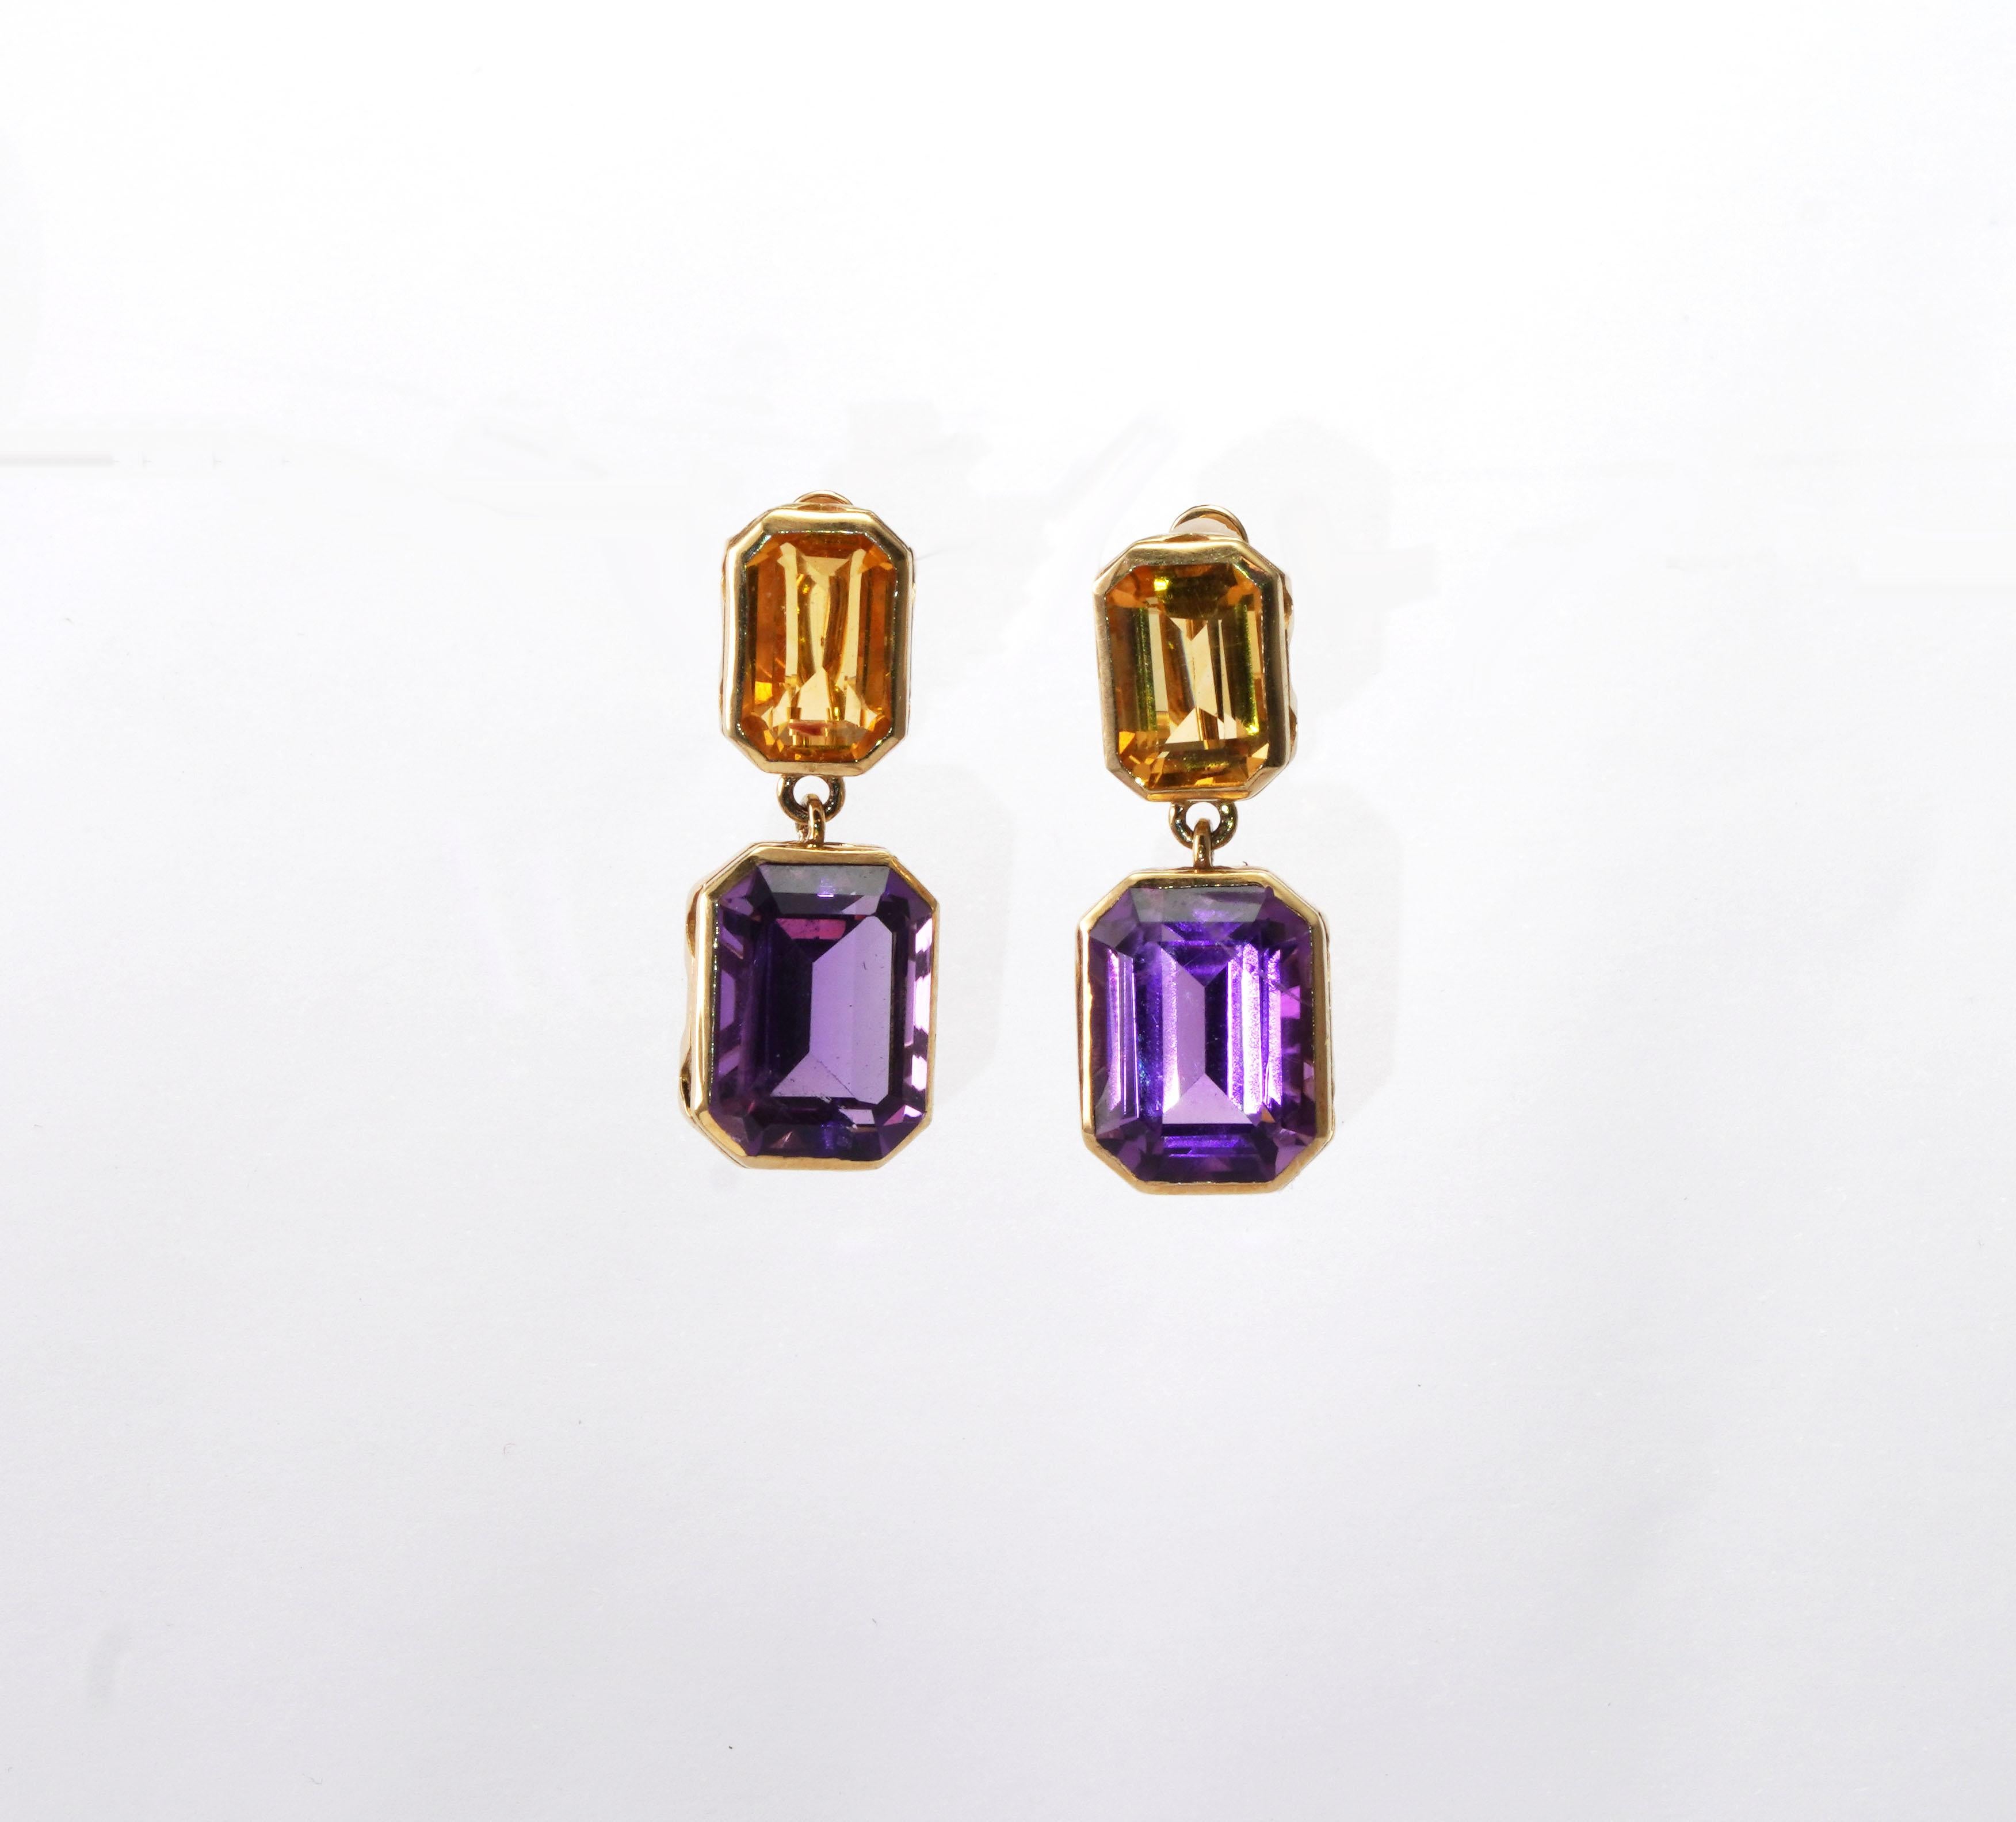 14 kt gold pair of earrings with Amethyst and Citrine 
Gold color: Yellow
Dimensions: 31 mm length
Total weight: 4.44 grams

Set with:
- Amethyst
Cut: Emerald
Weight: 10.7 ct
Color: Purple

- Citrine
Cut: Emerald
Weight: 3.60 ct
Color: Yellow